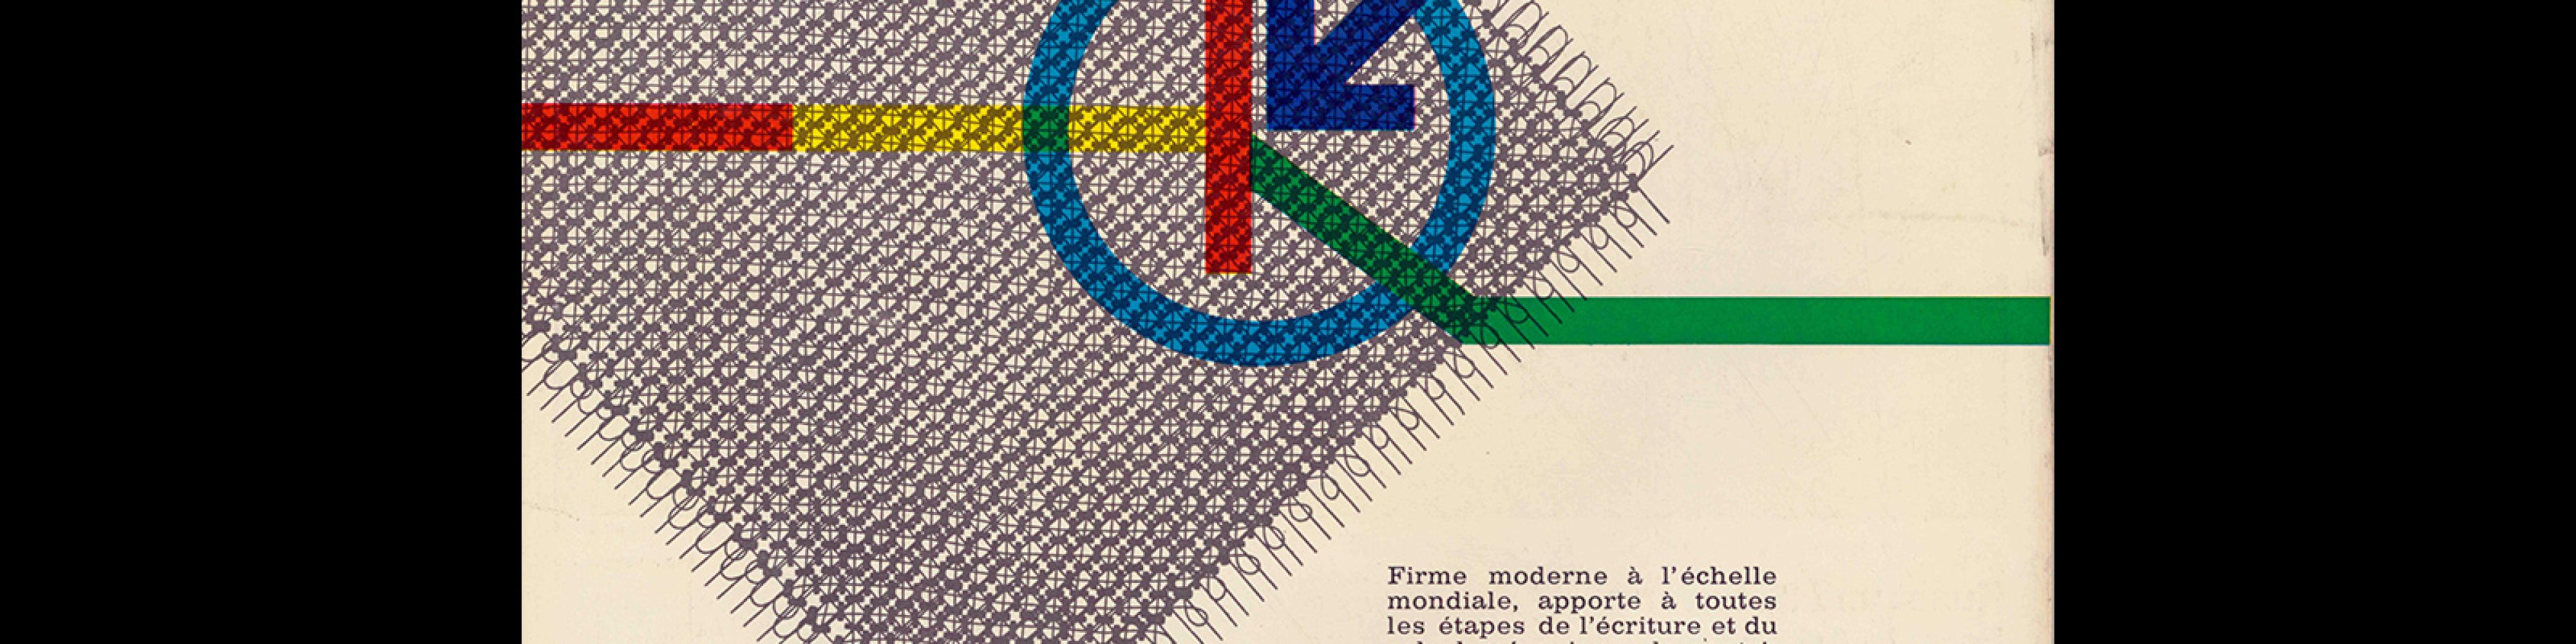 Olivetti accounting machine Audit and Mercator, advertisement, 1960-62. Designed by Giovanni Pintori.